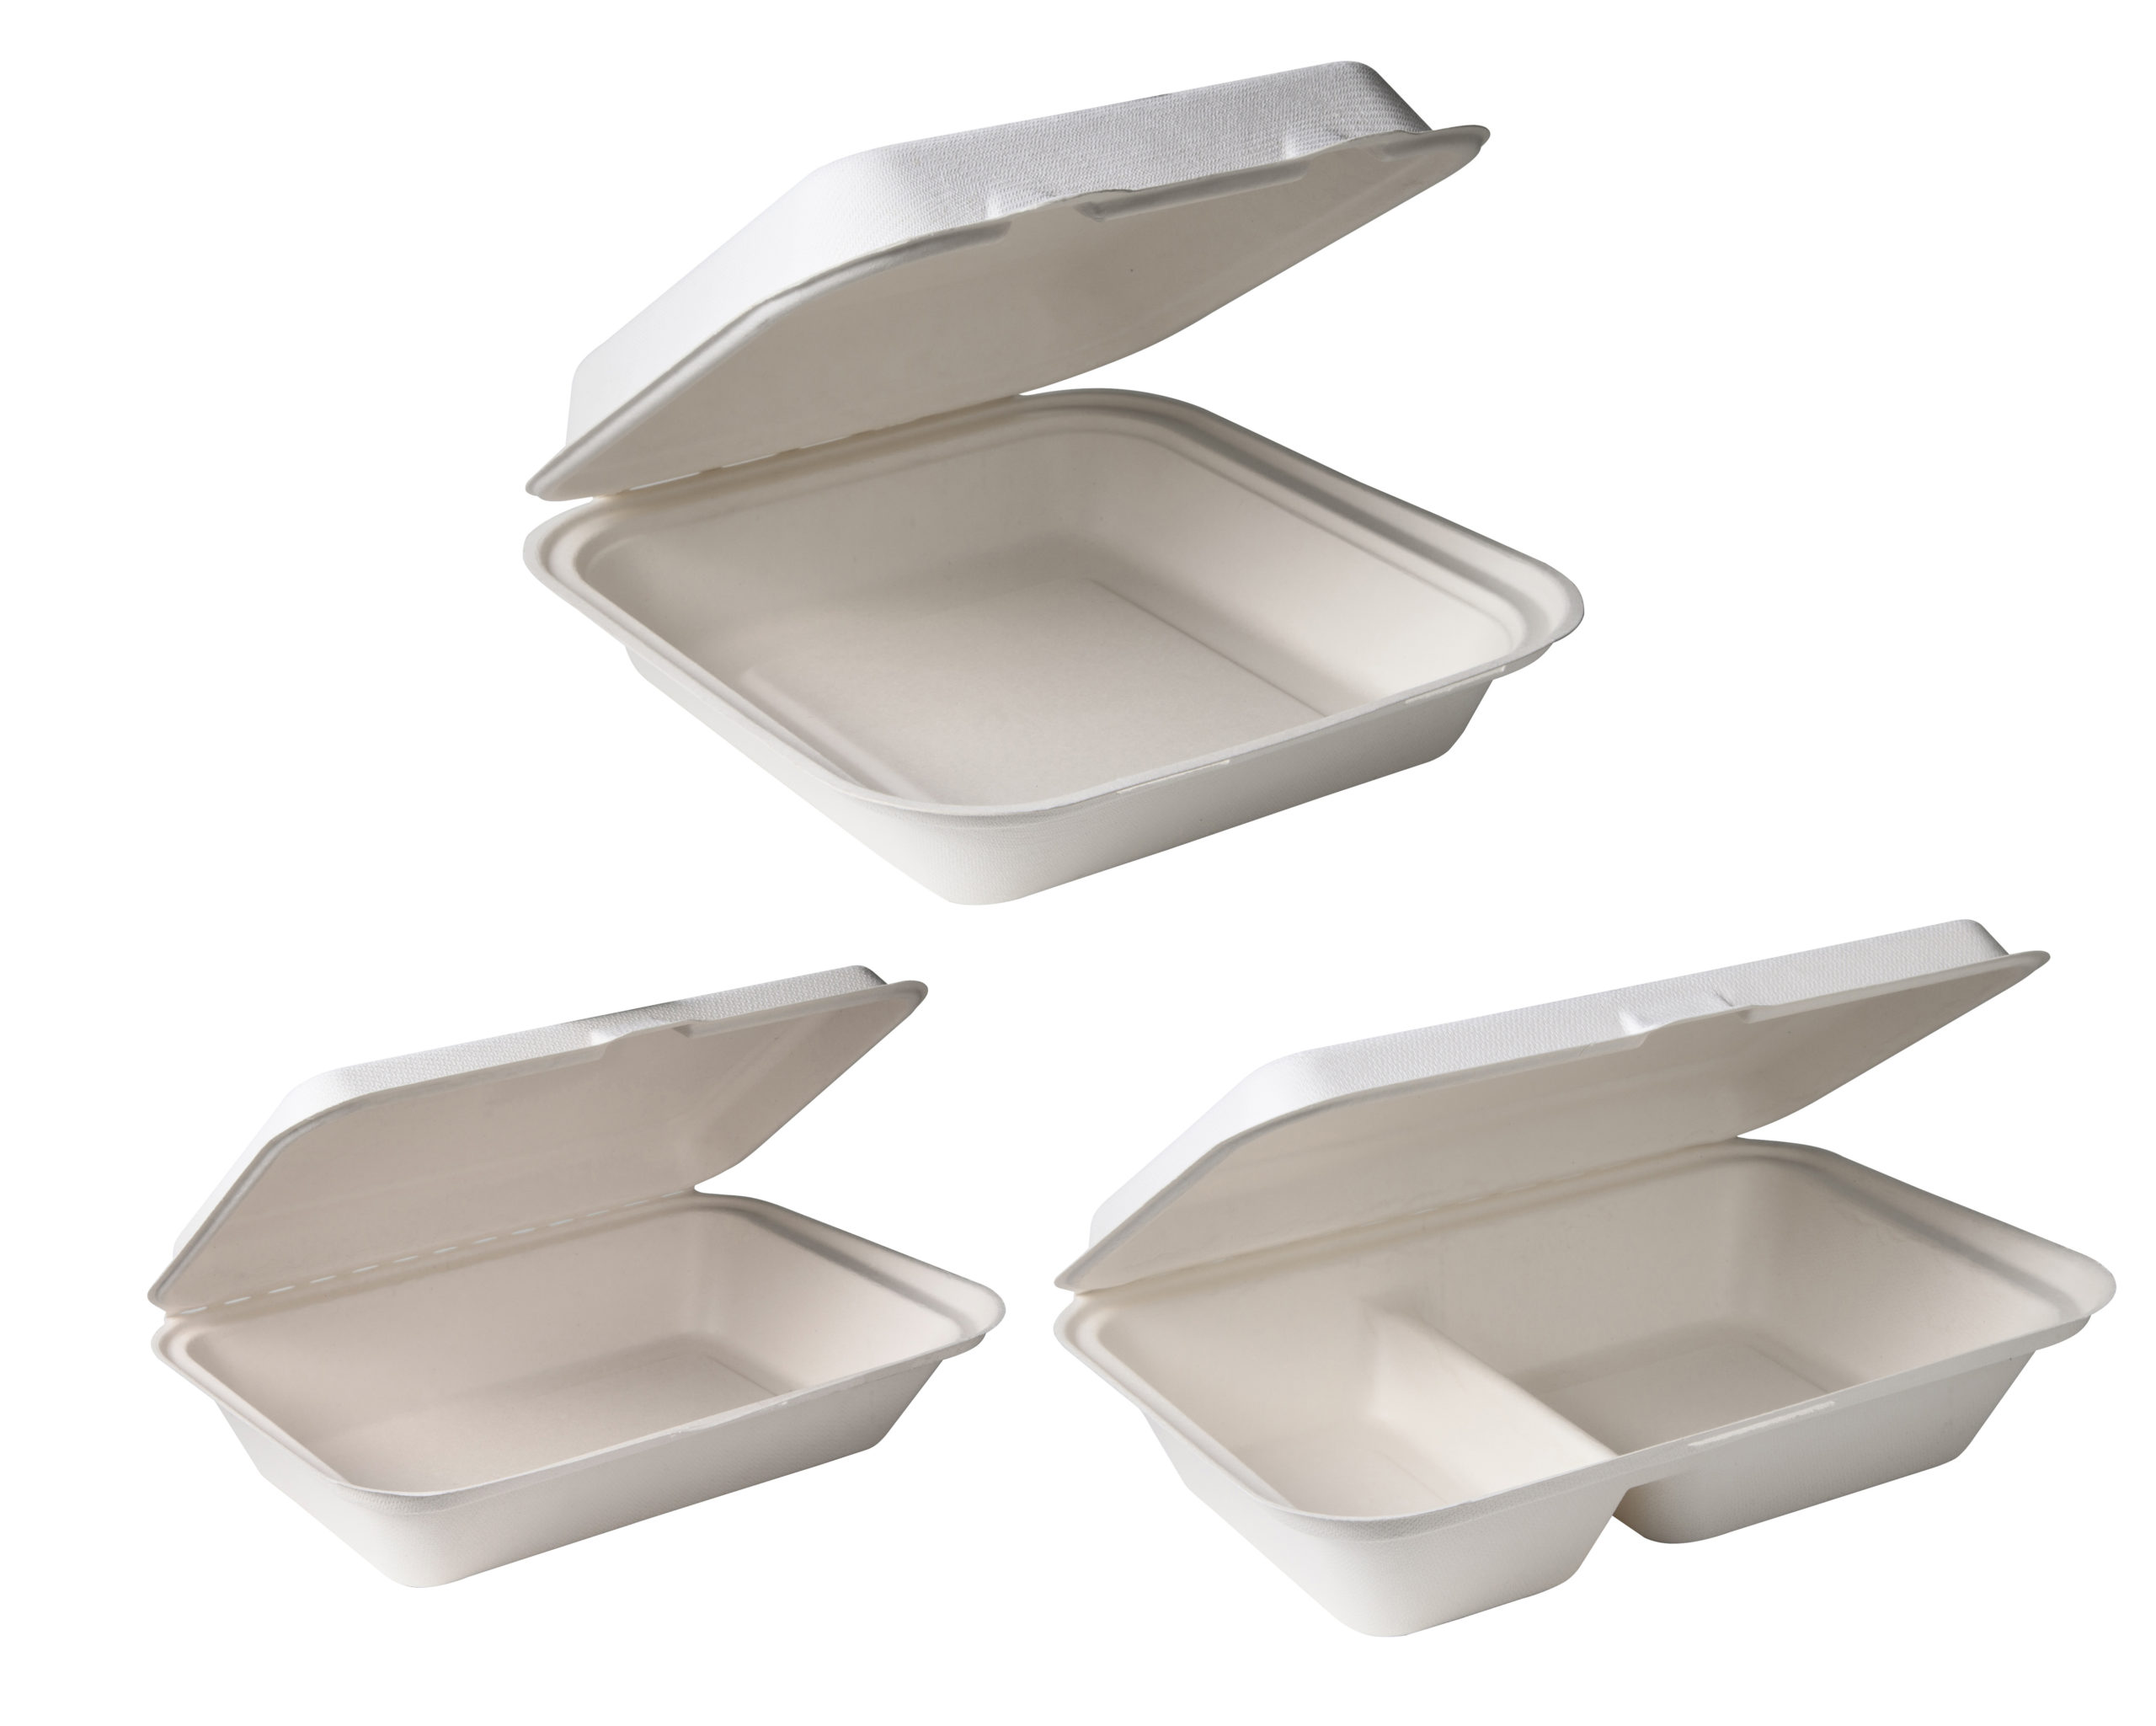 Biodegradable To Go Containers Food Eco Friendly Disposable